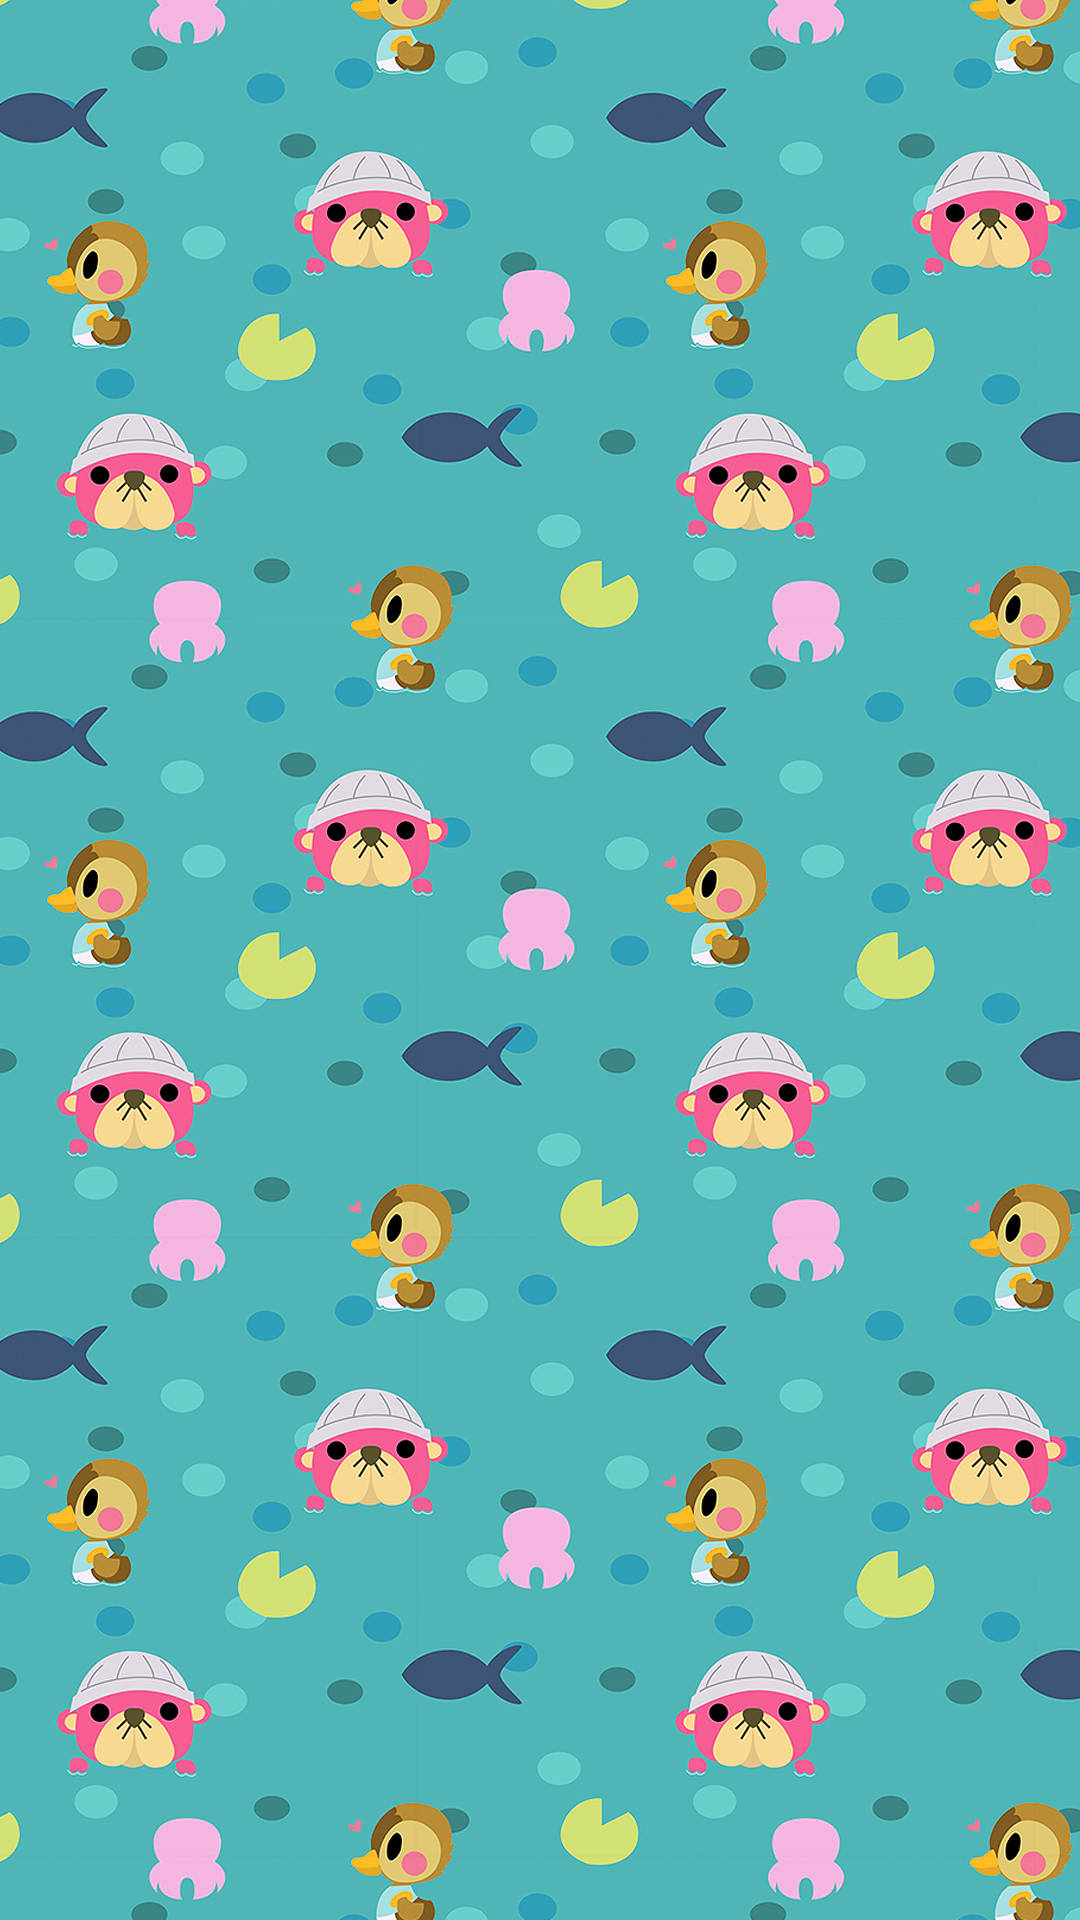 Welcome to the lovely world of Animal Crossing Wallpaper